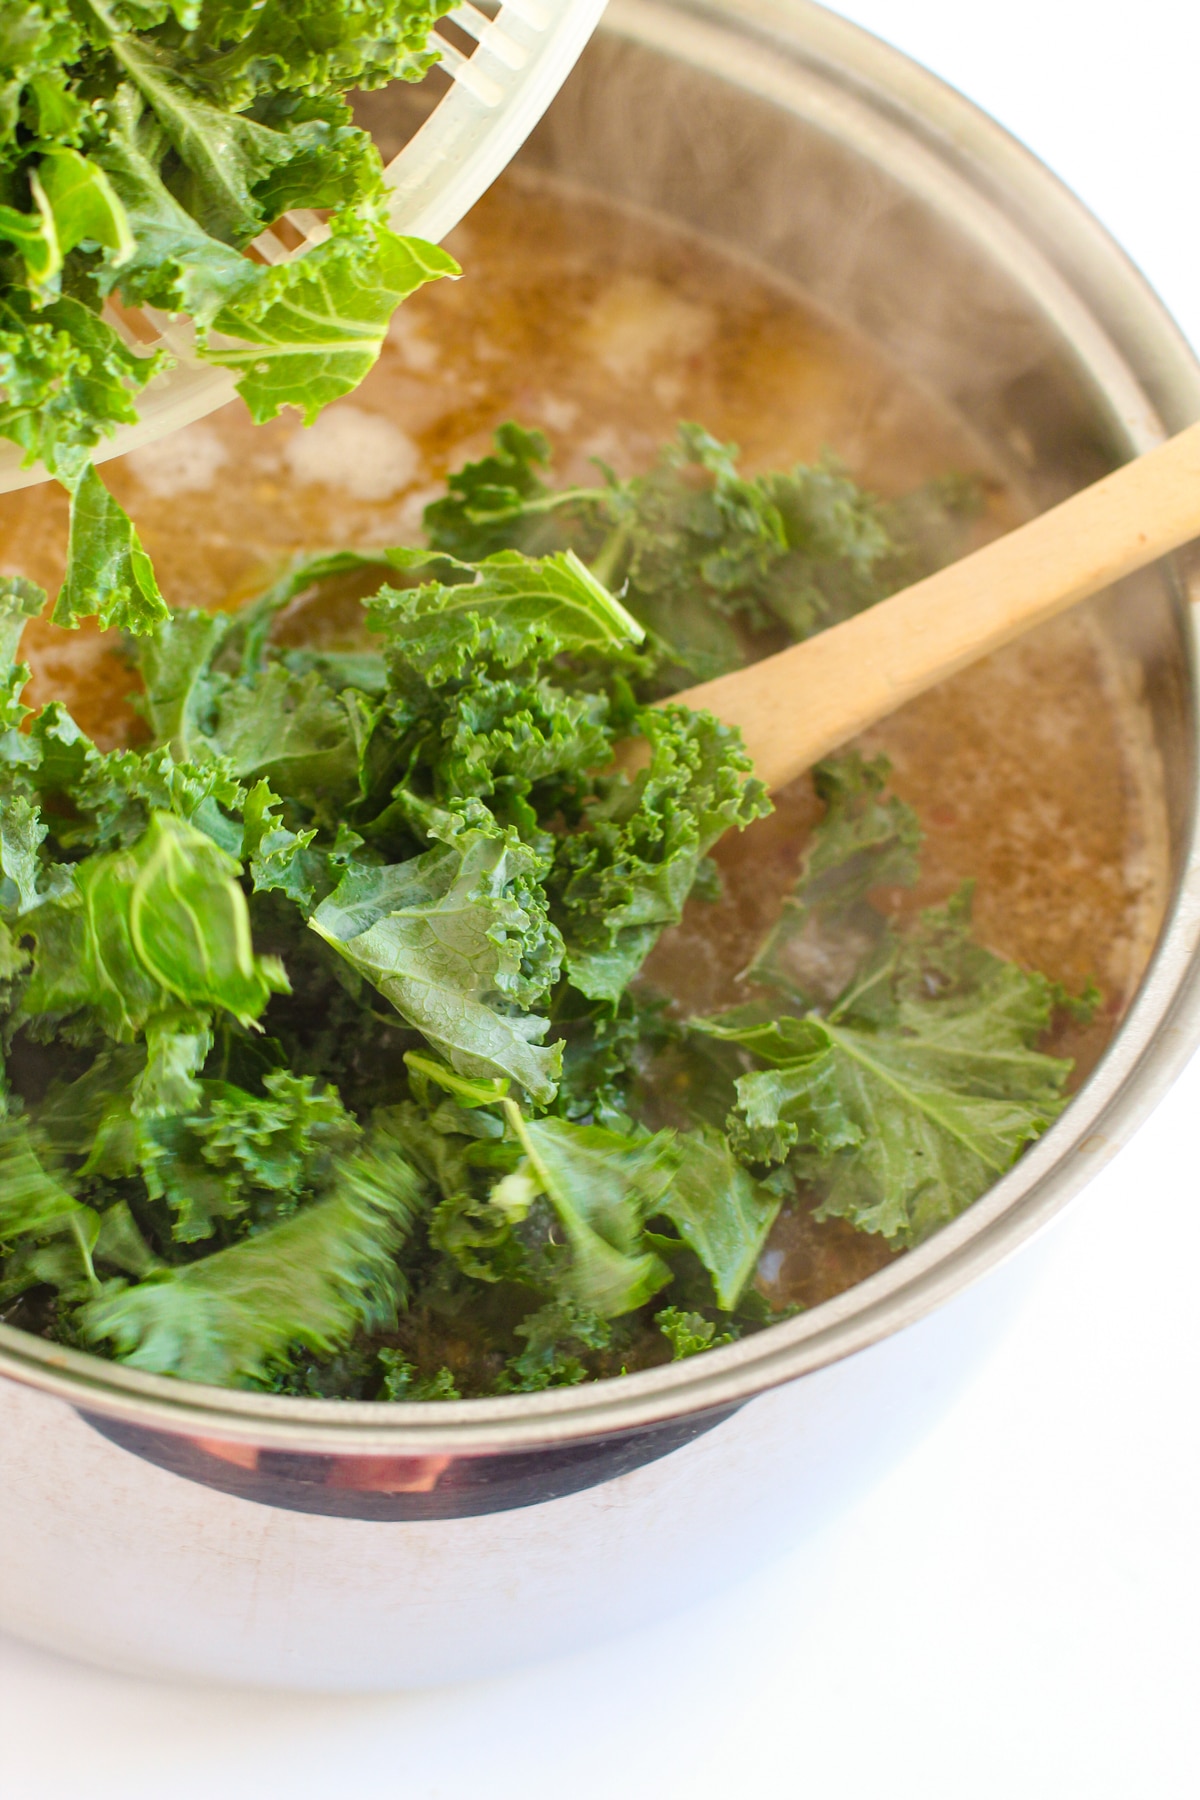 Next process in preparing Olive Garden Zuppa Toscano Soup is to add kale to the mixture.